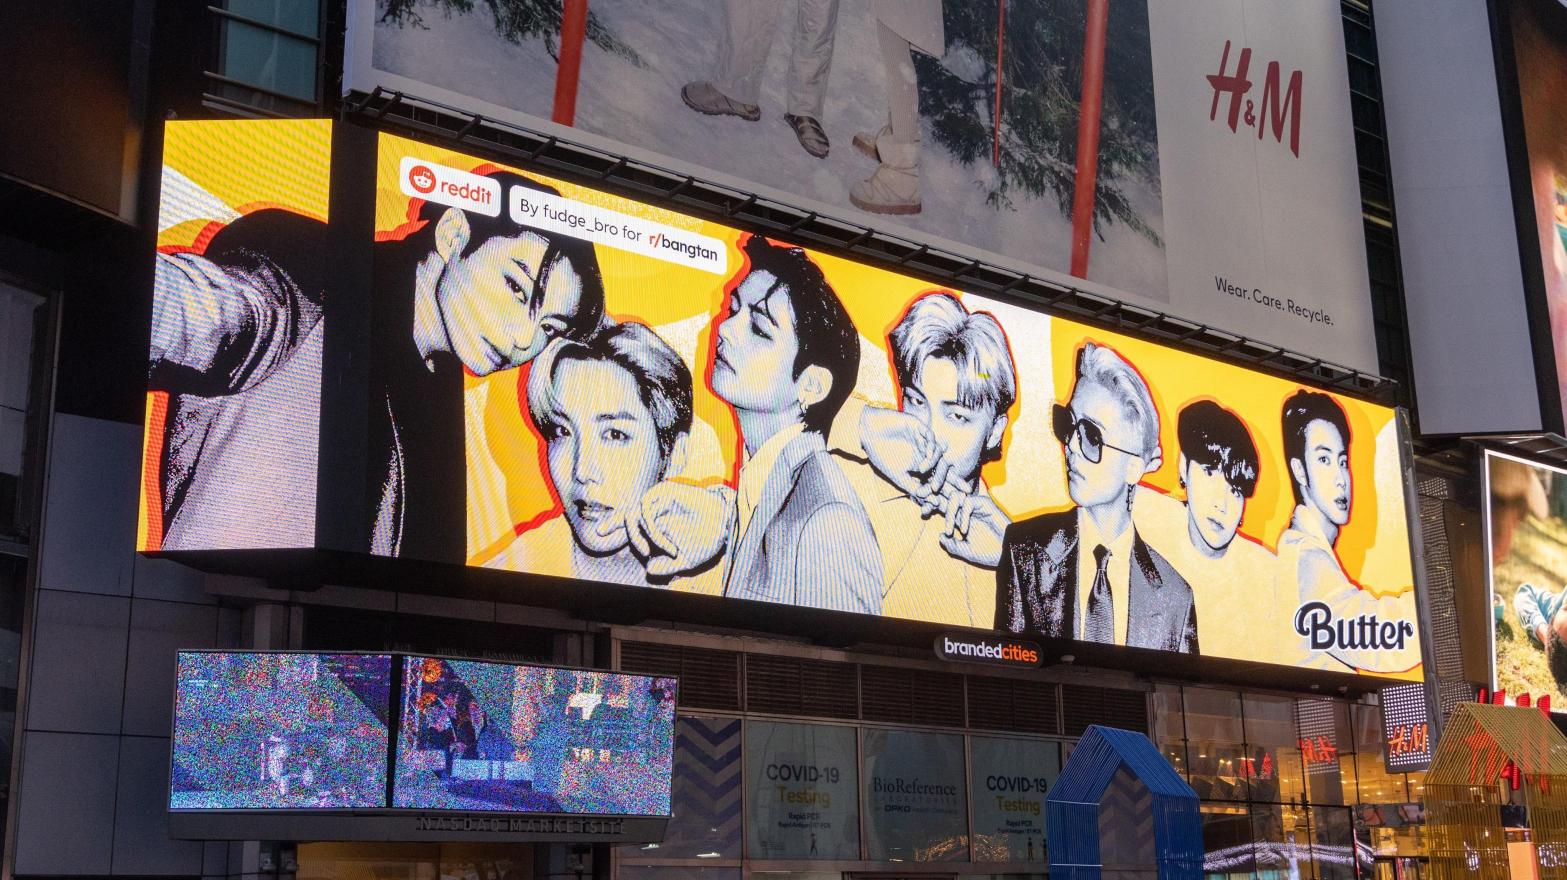 A BTS billboard in Times Square in New York City. The design was created by BTS fans and chosen in a Reddit-sponsored contest. (Photo: Courtesy of Reddit)